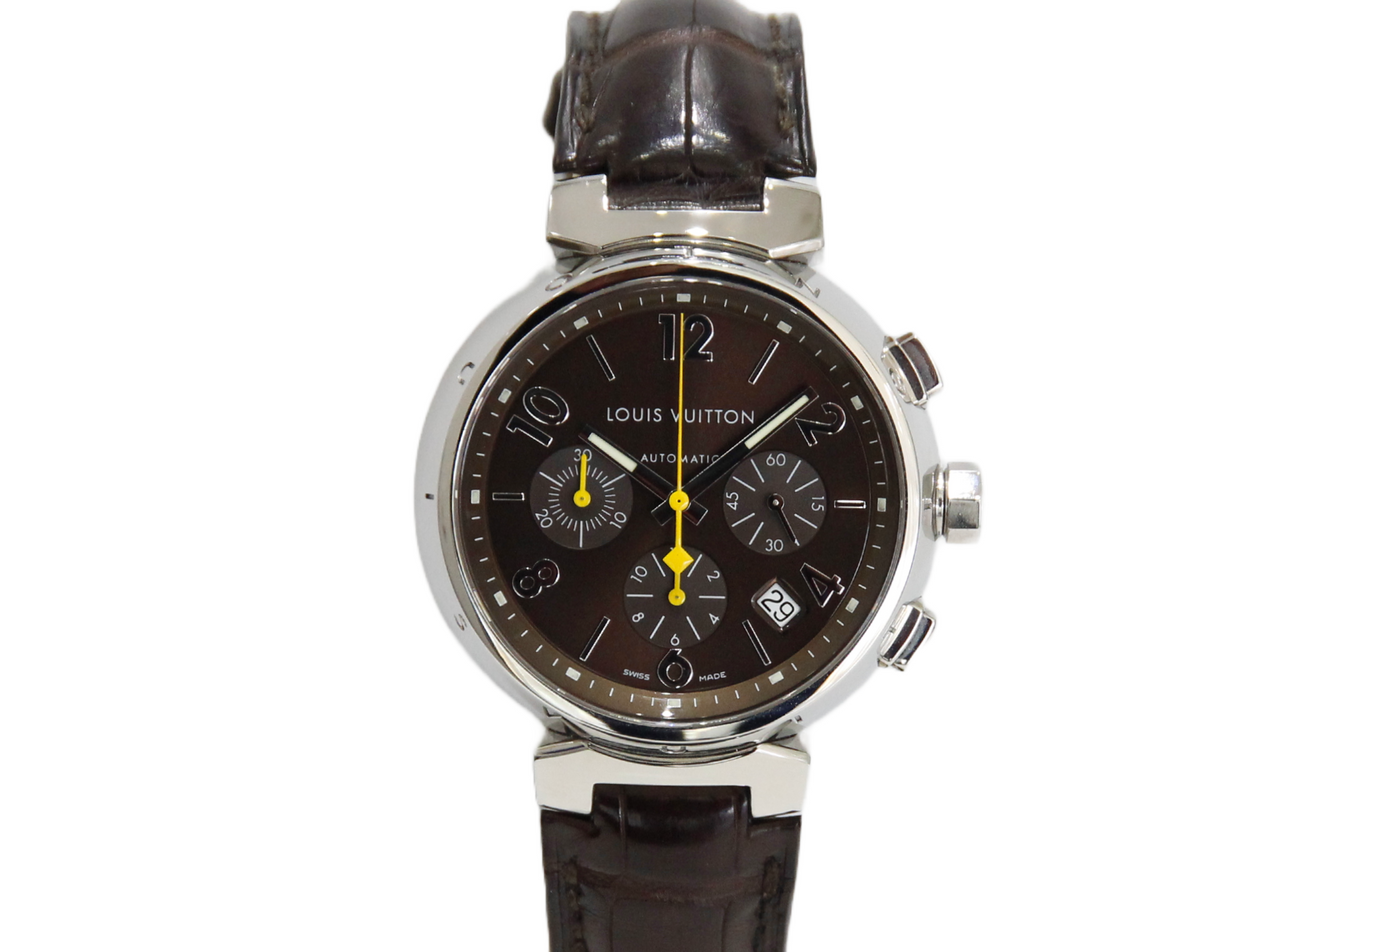 Louis Vuitton Q1121 Chronograph Stainless Steel Automatic Men's Watch